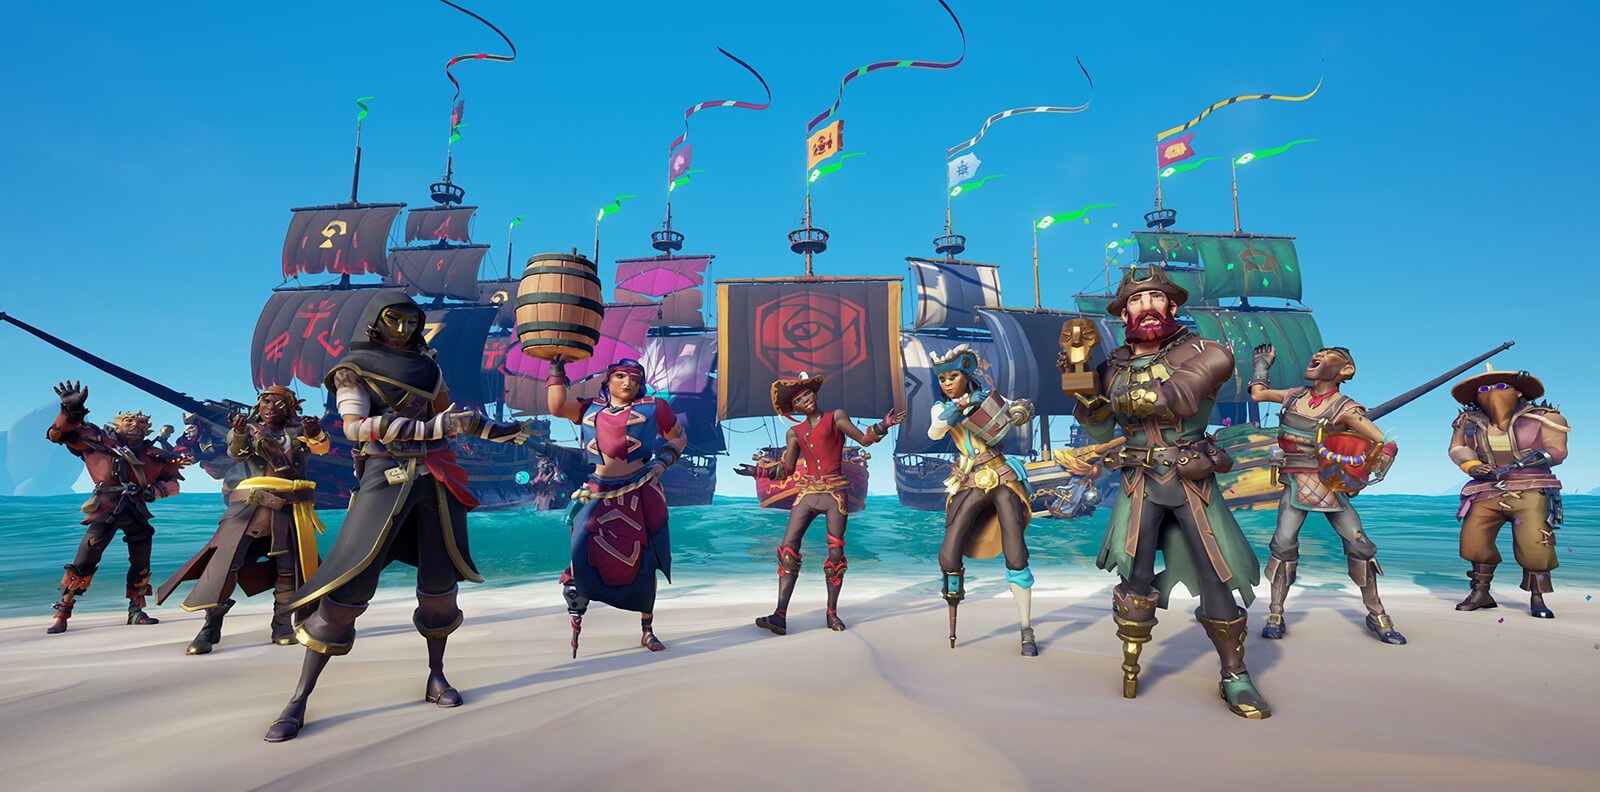 Sea-of-thieves-30-millions